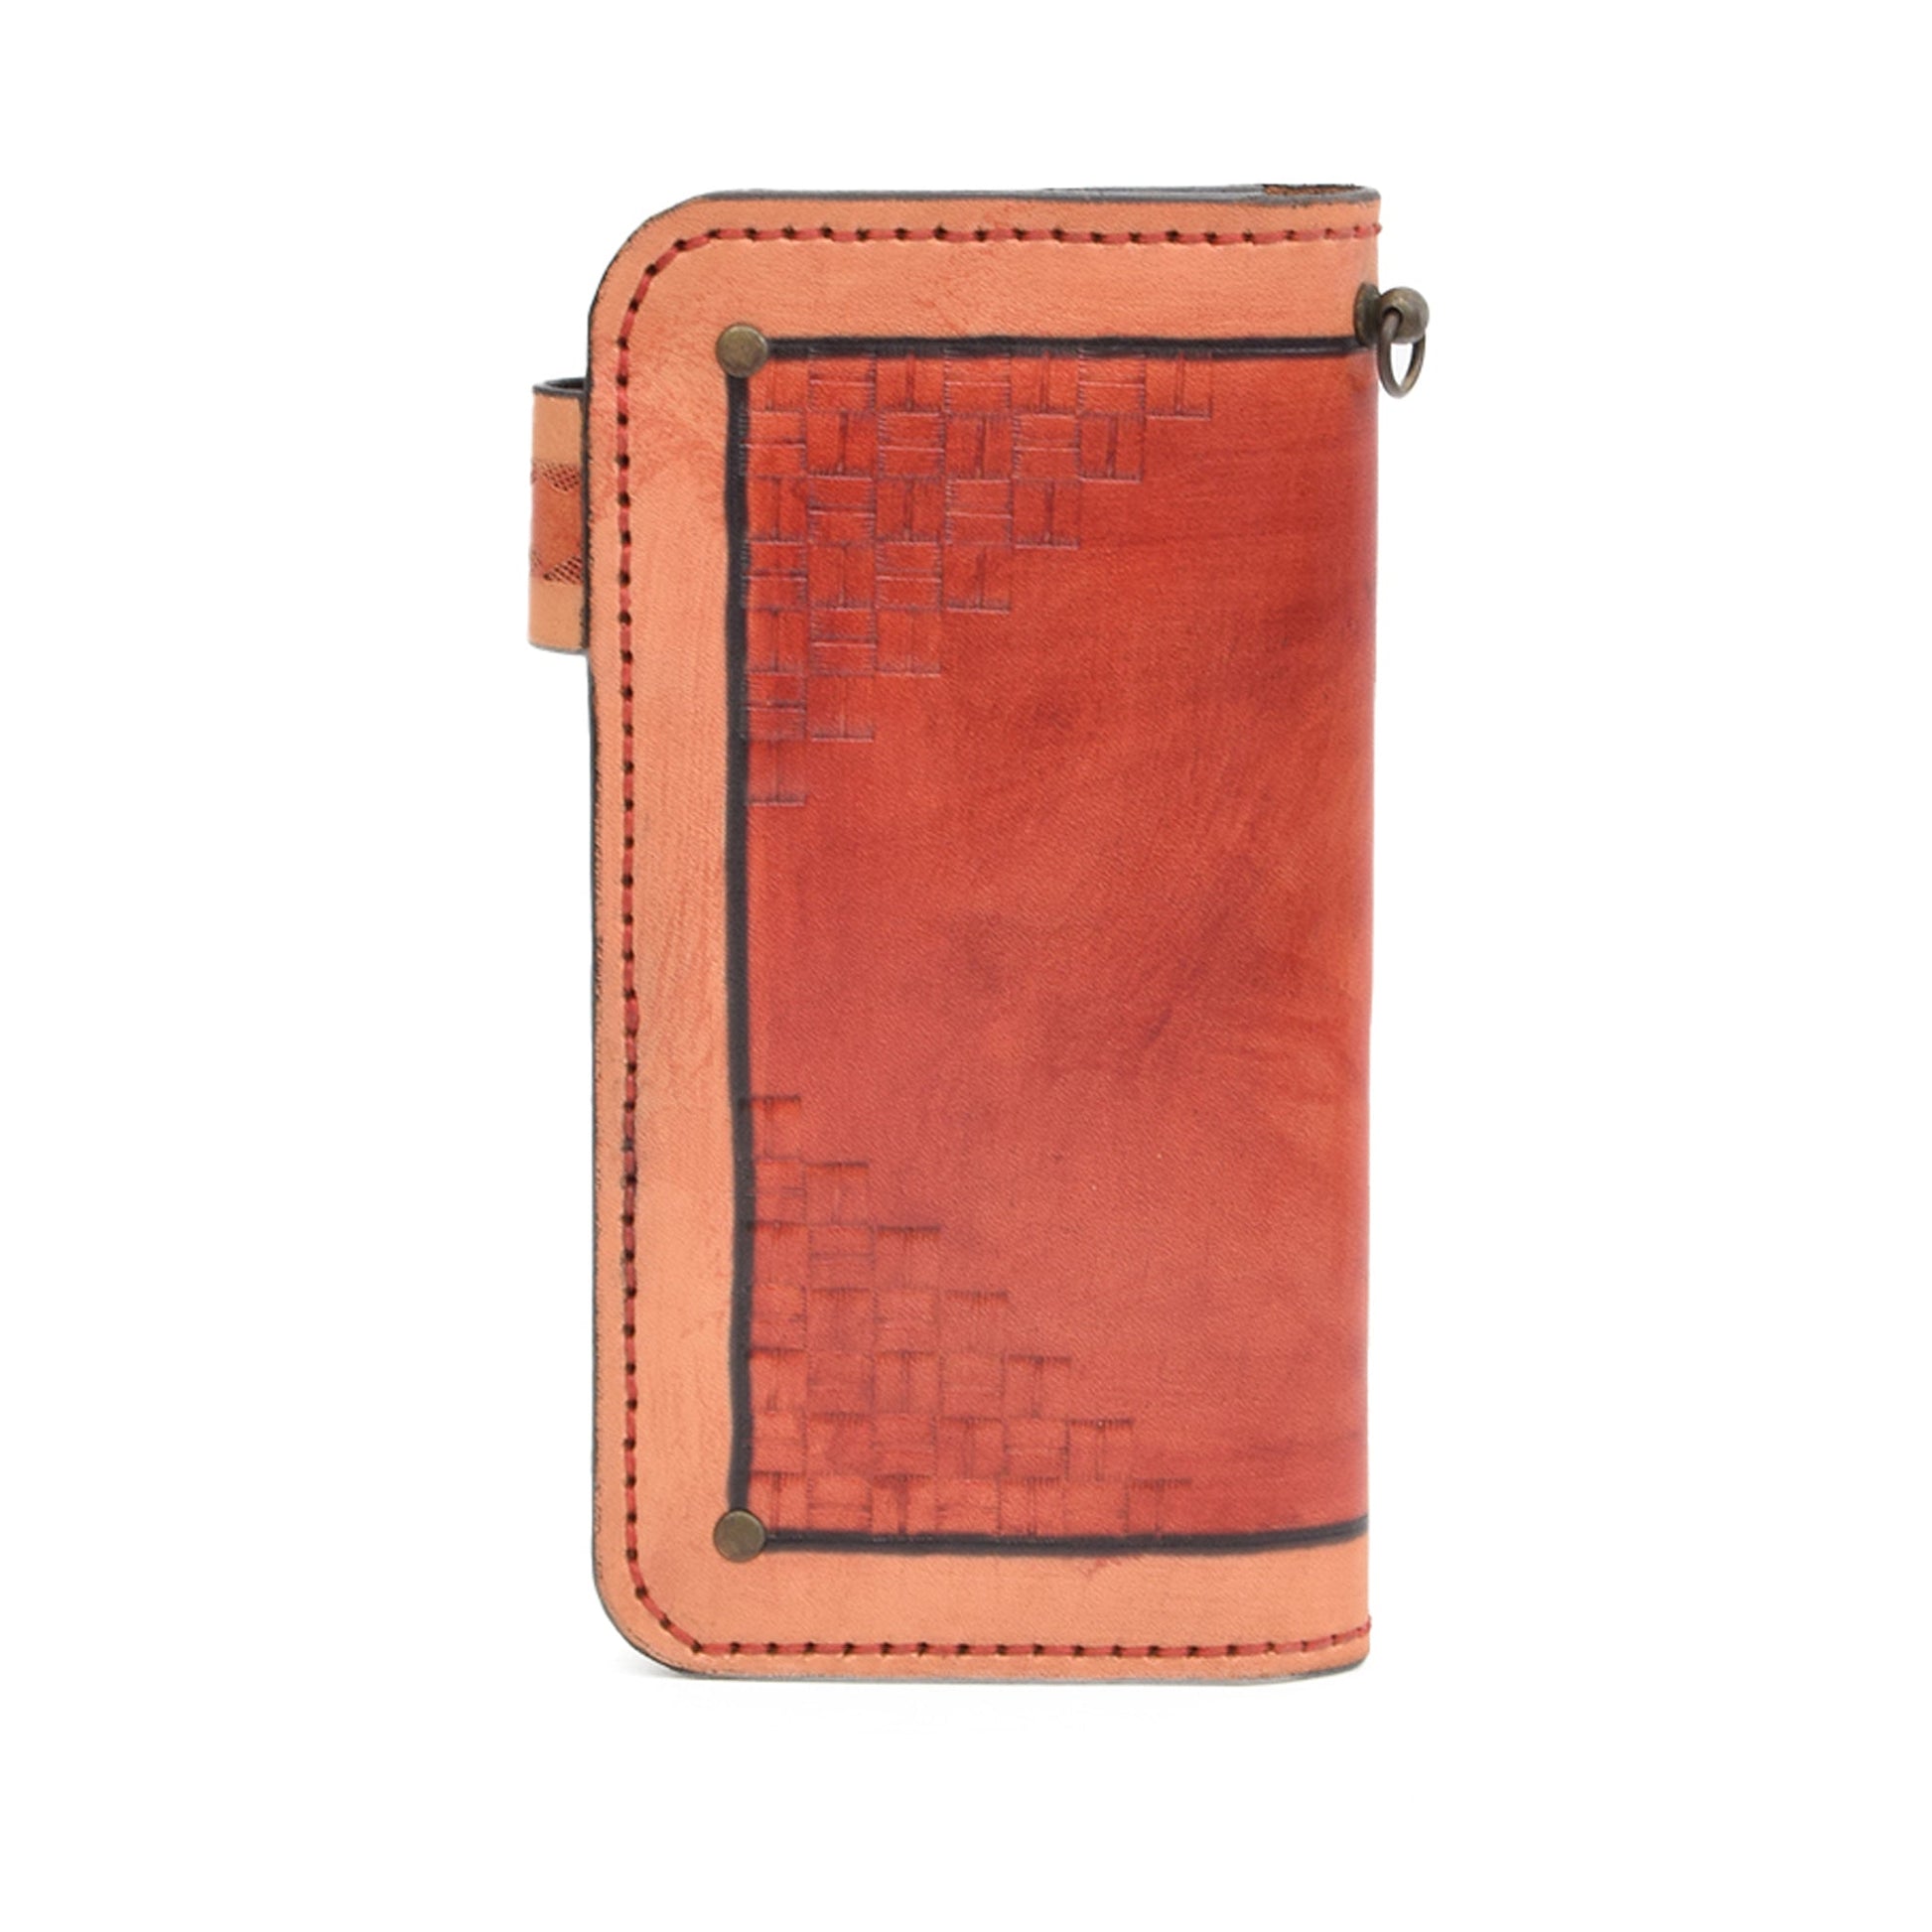 Leather Carved & Crafted Wallet Tulip - Tan - Wallets Zengoda Shop online from Artisan Brands